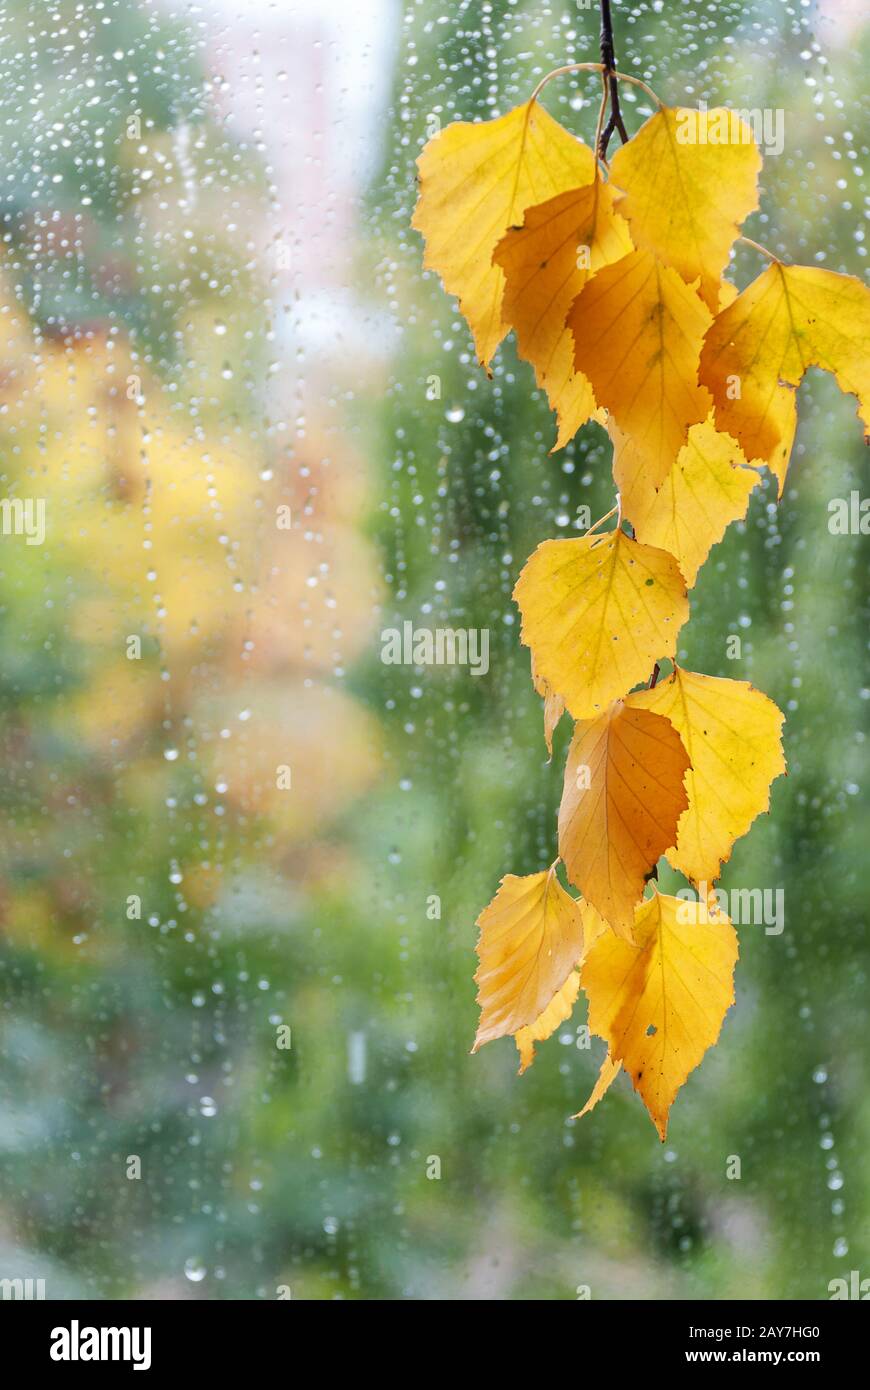 Birch branch with yellow leaves Stock Photo